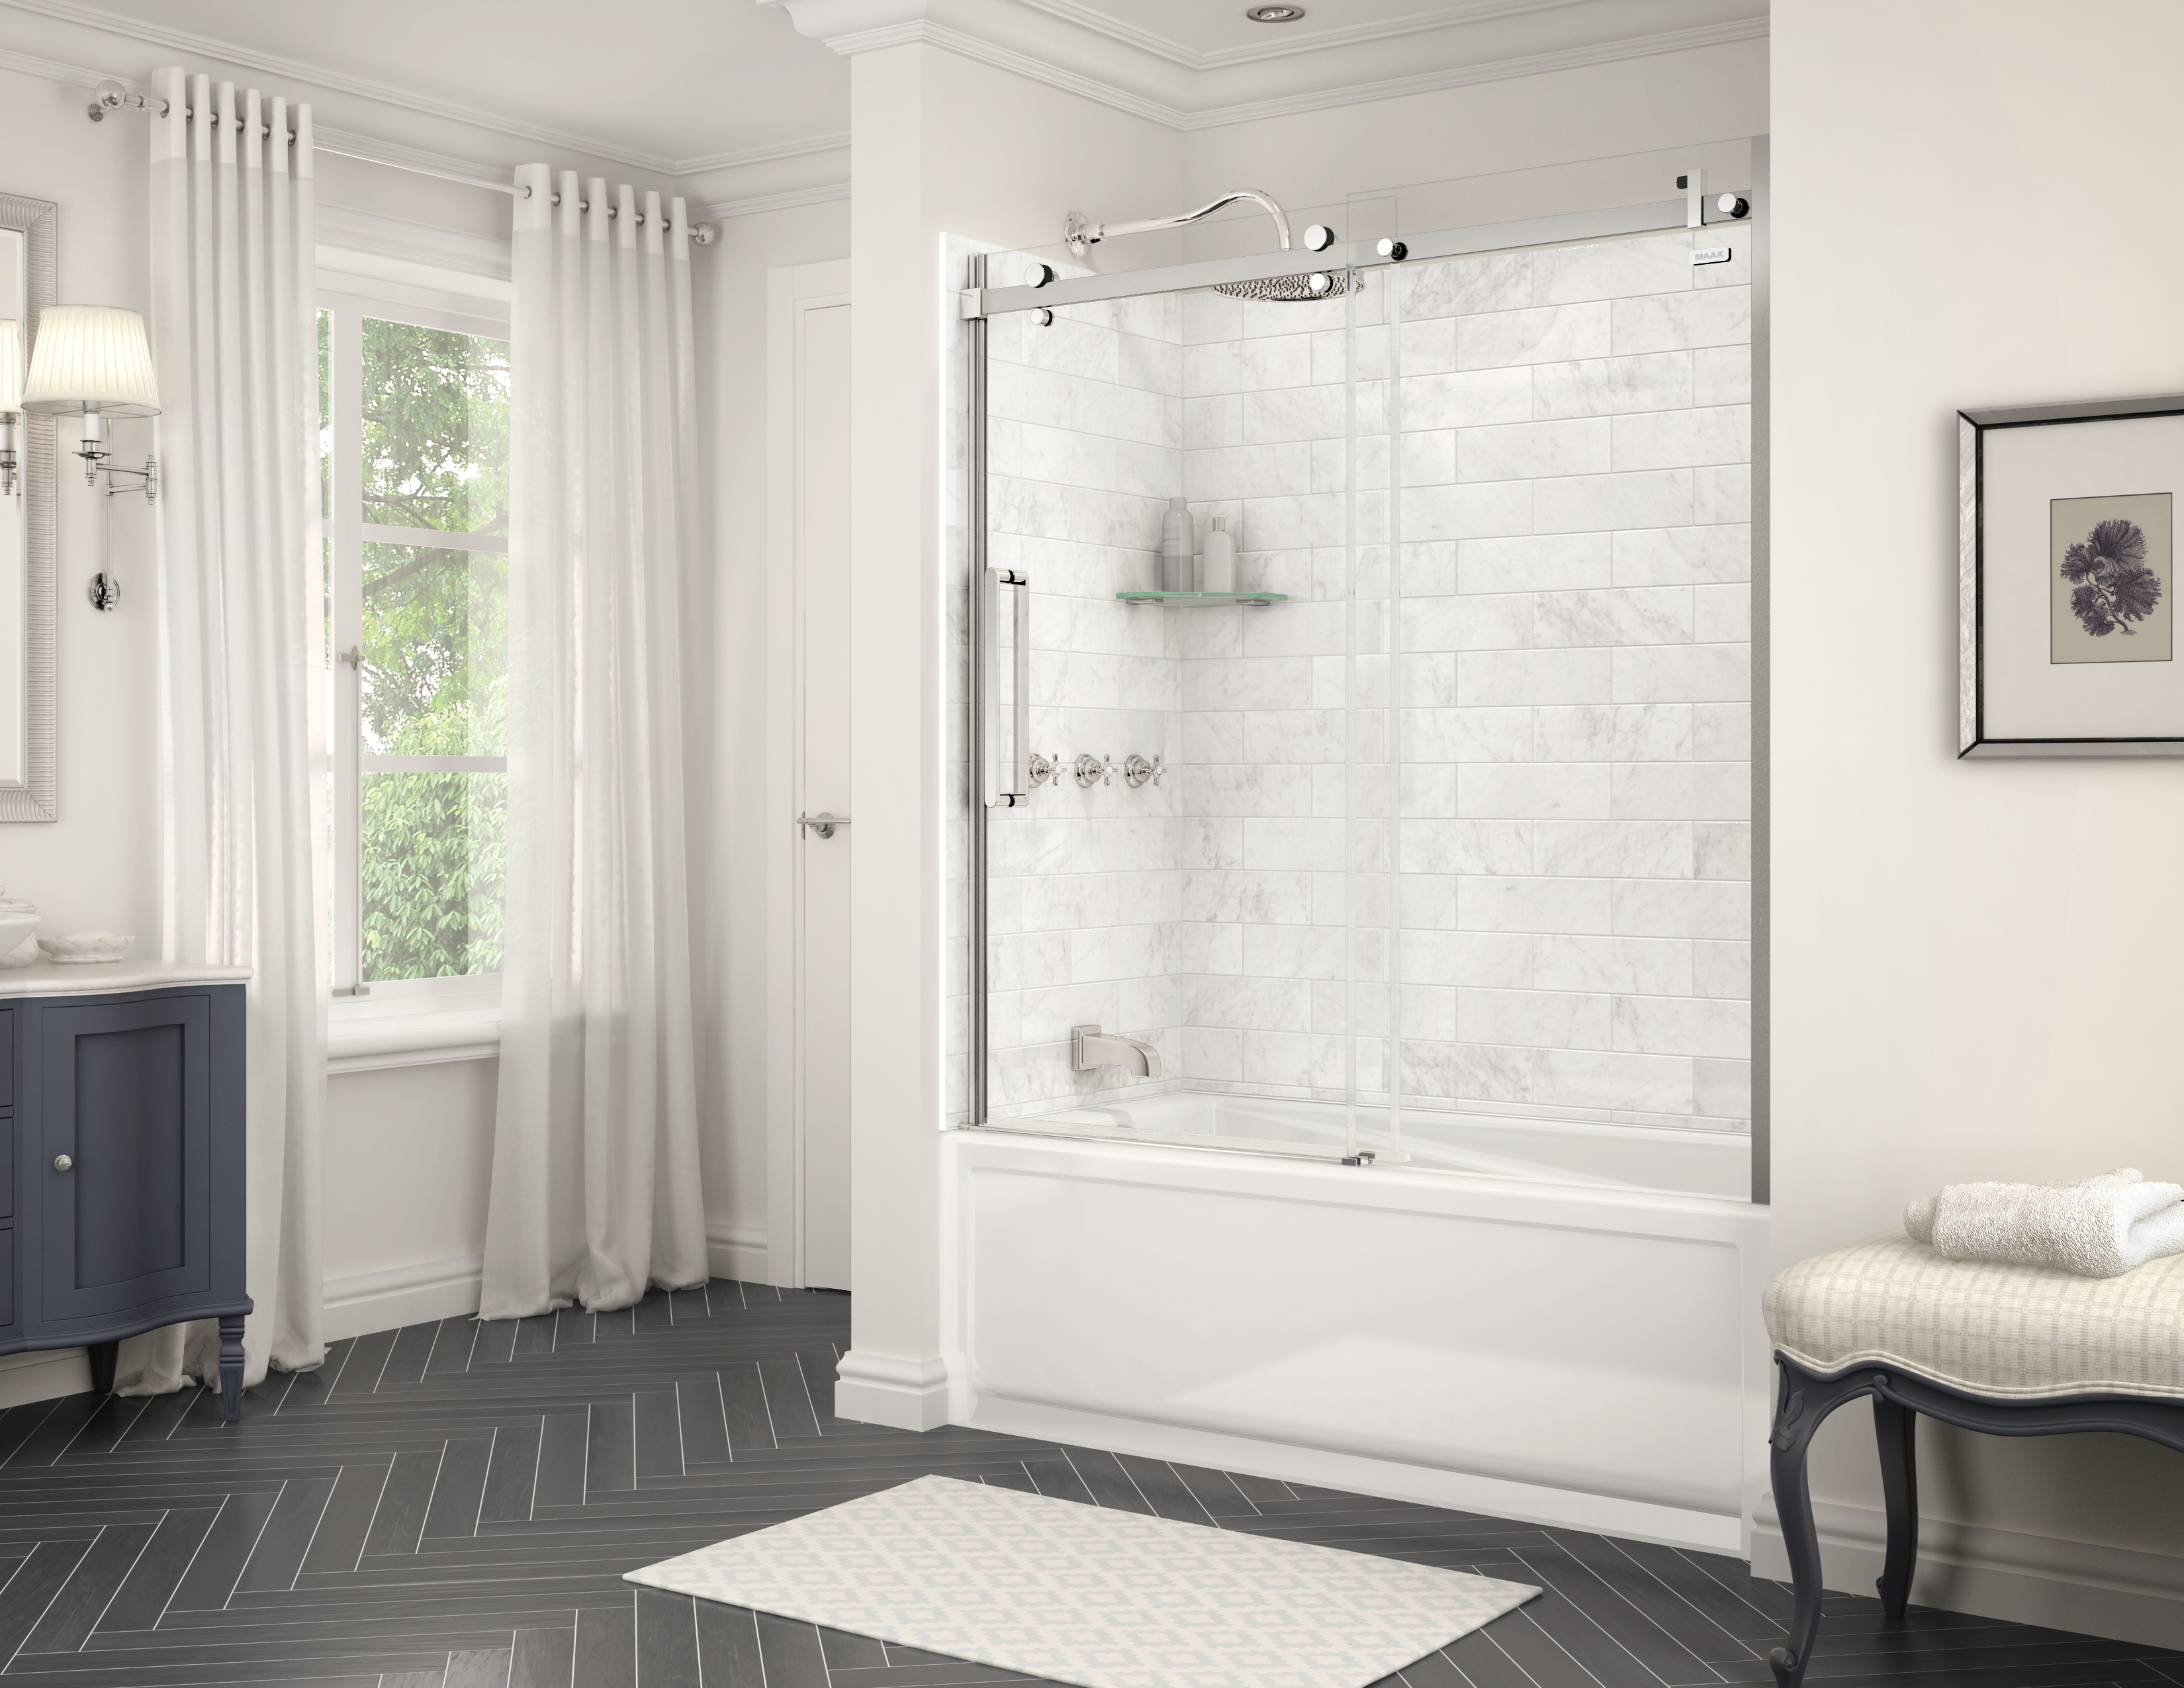 MAAX's U tile is an easy to install and maintain option to ceramic tile.